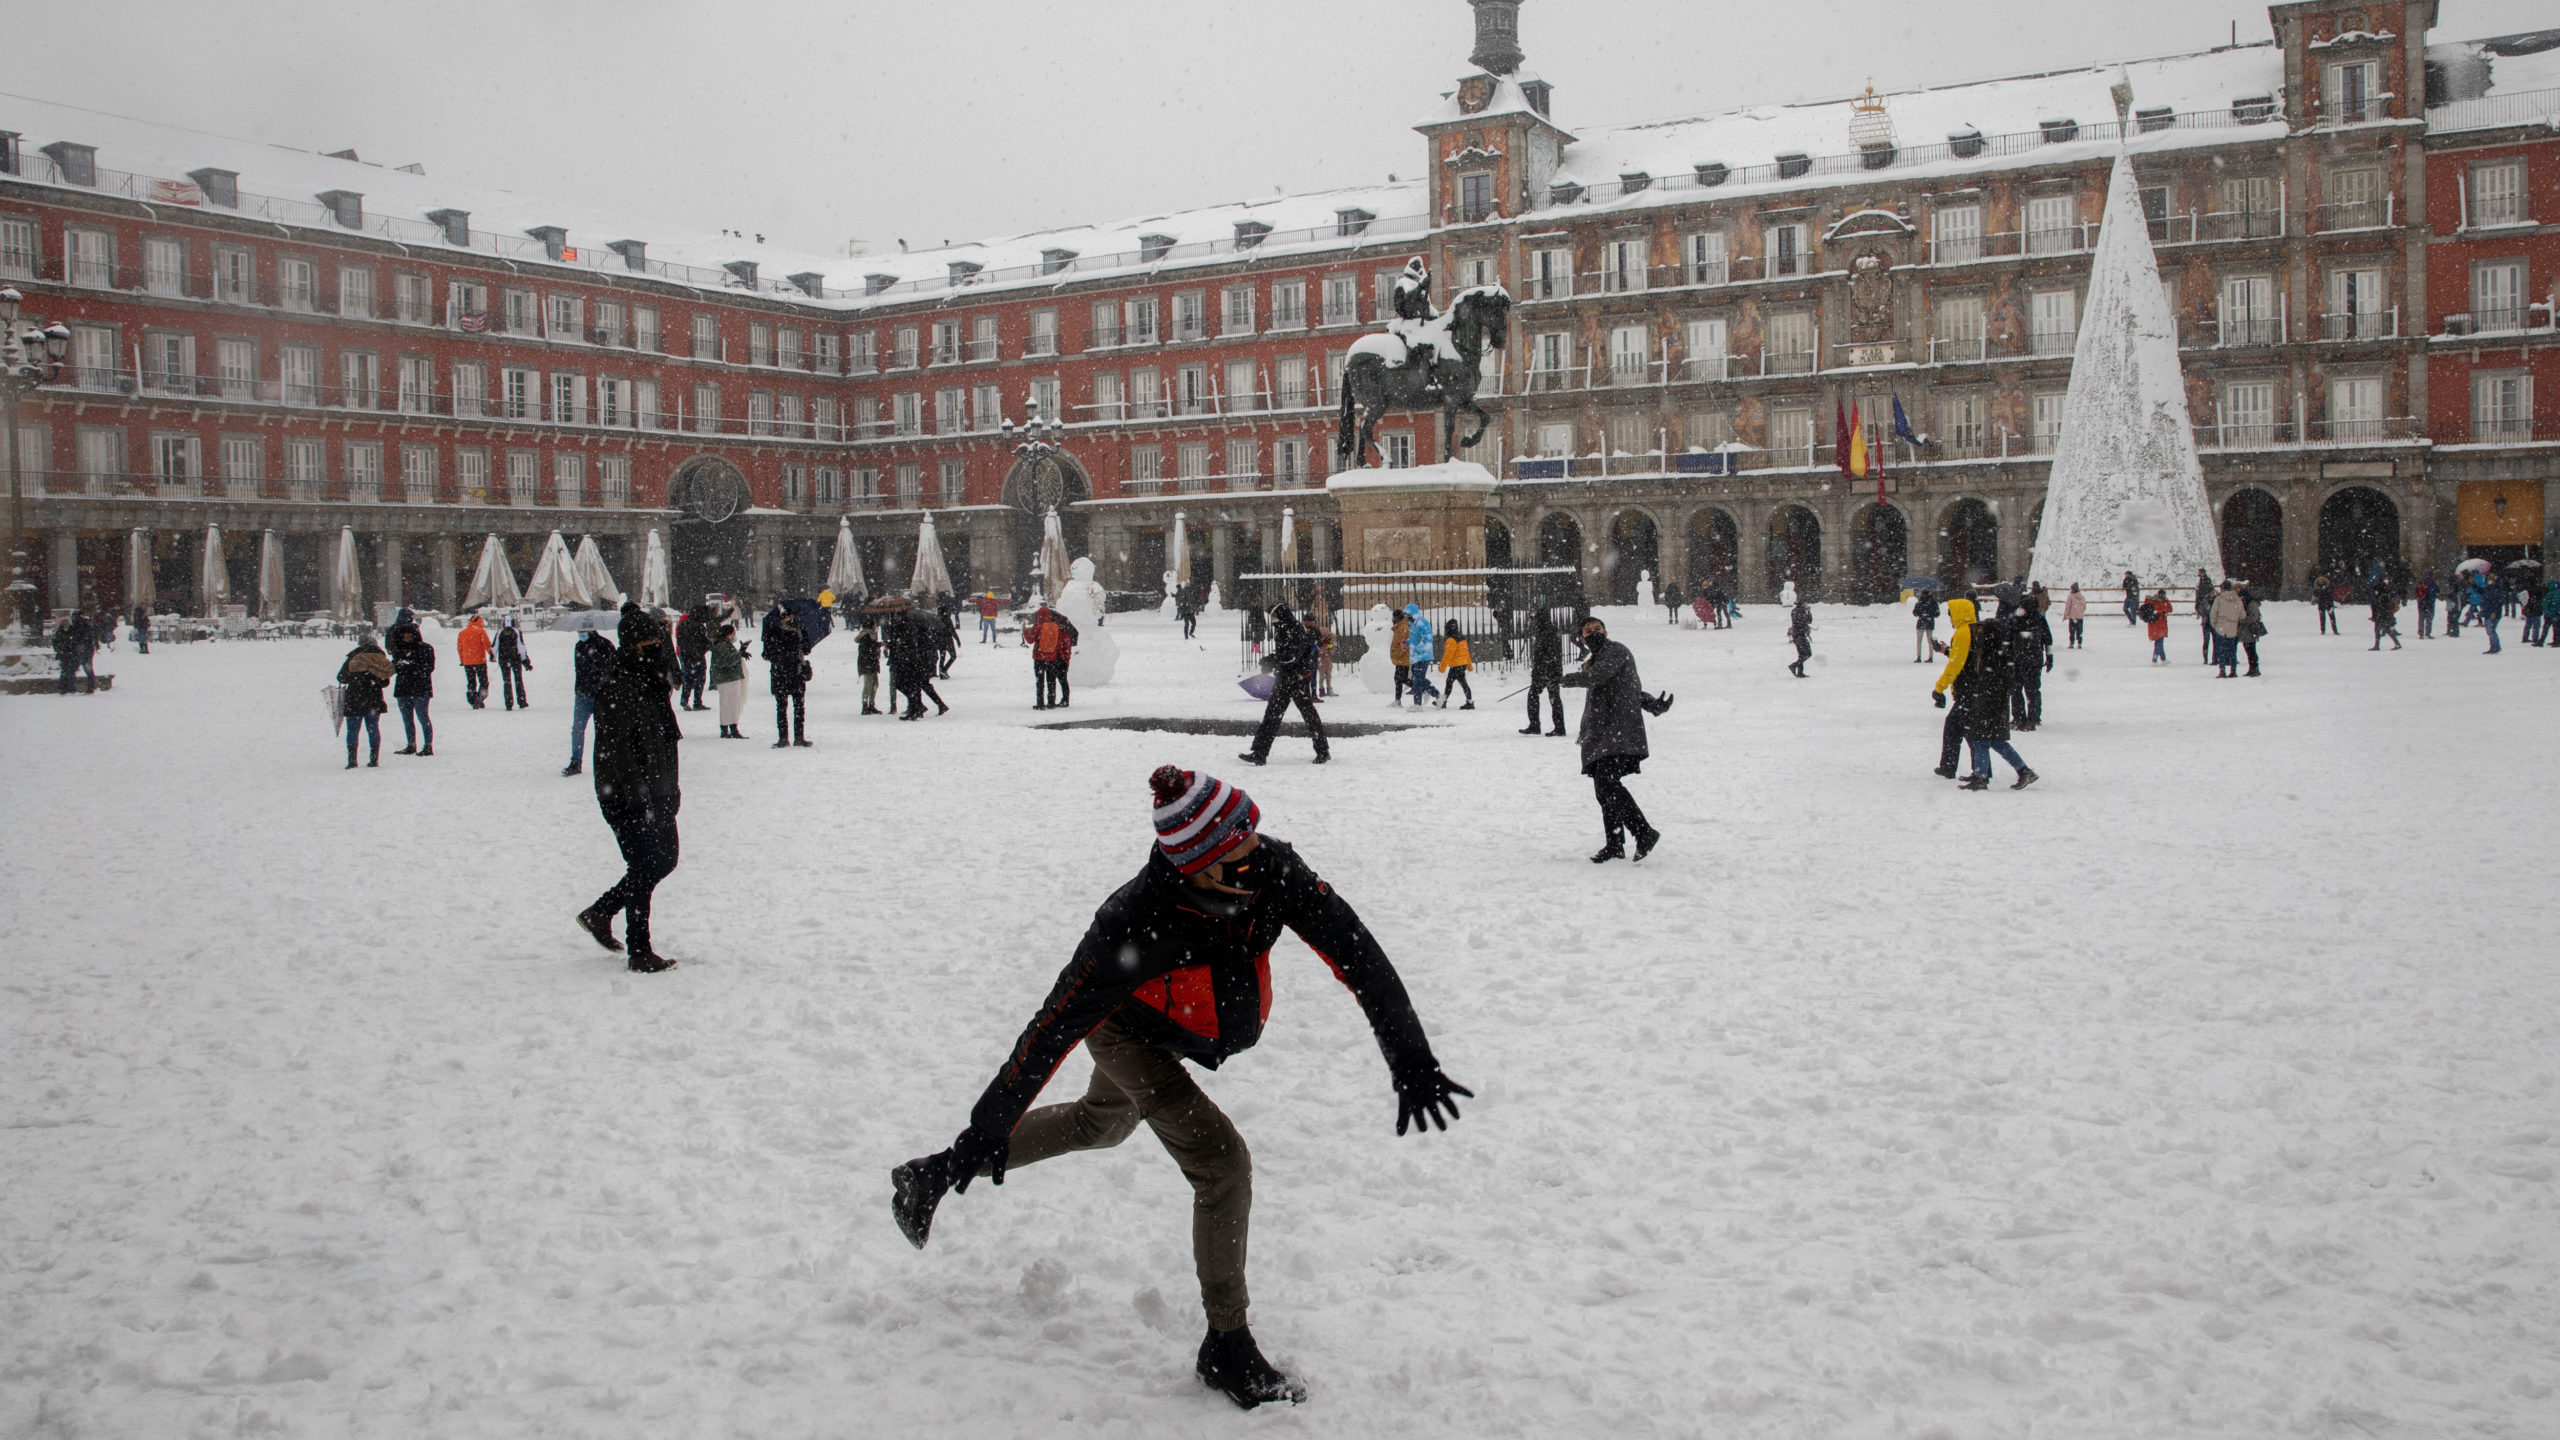 A man throws a snowball at Plaza Mayor during heavy snowfall on January 09, 2021 in Madrid, Spain.  (Photo: Pablo Blazquez Dominguez, Getty Images)